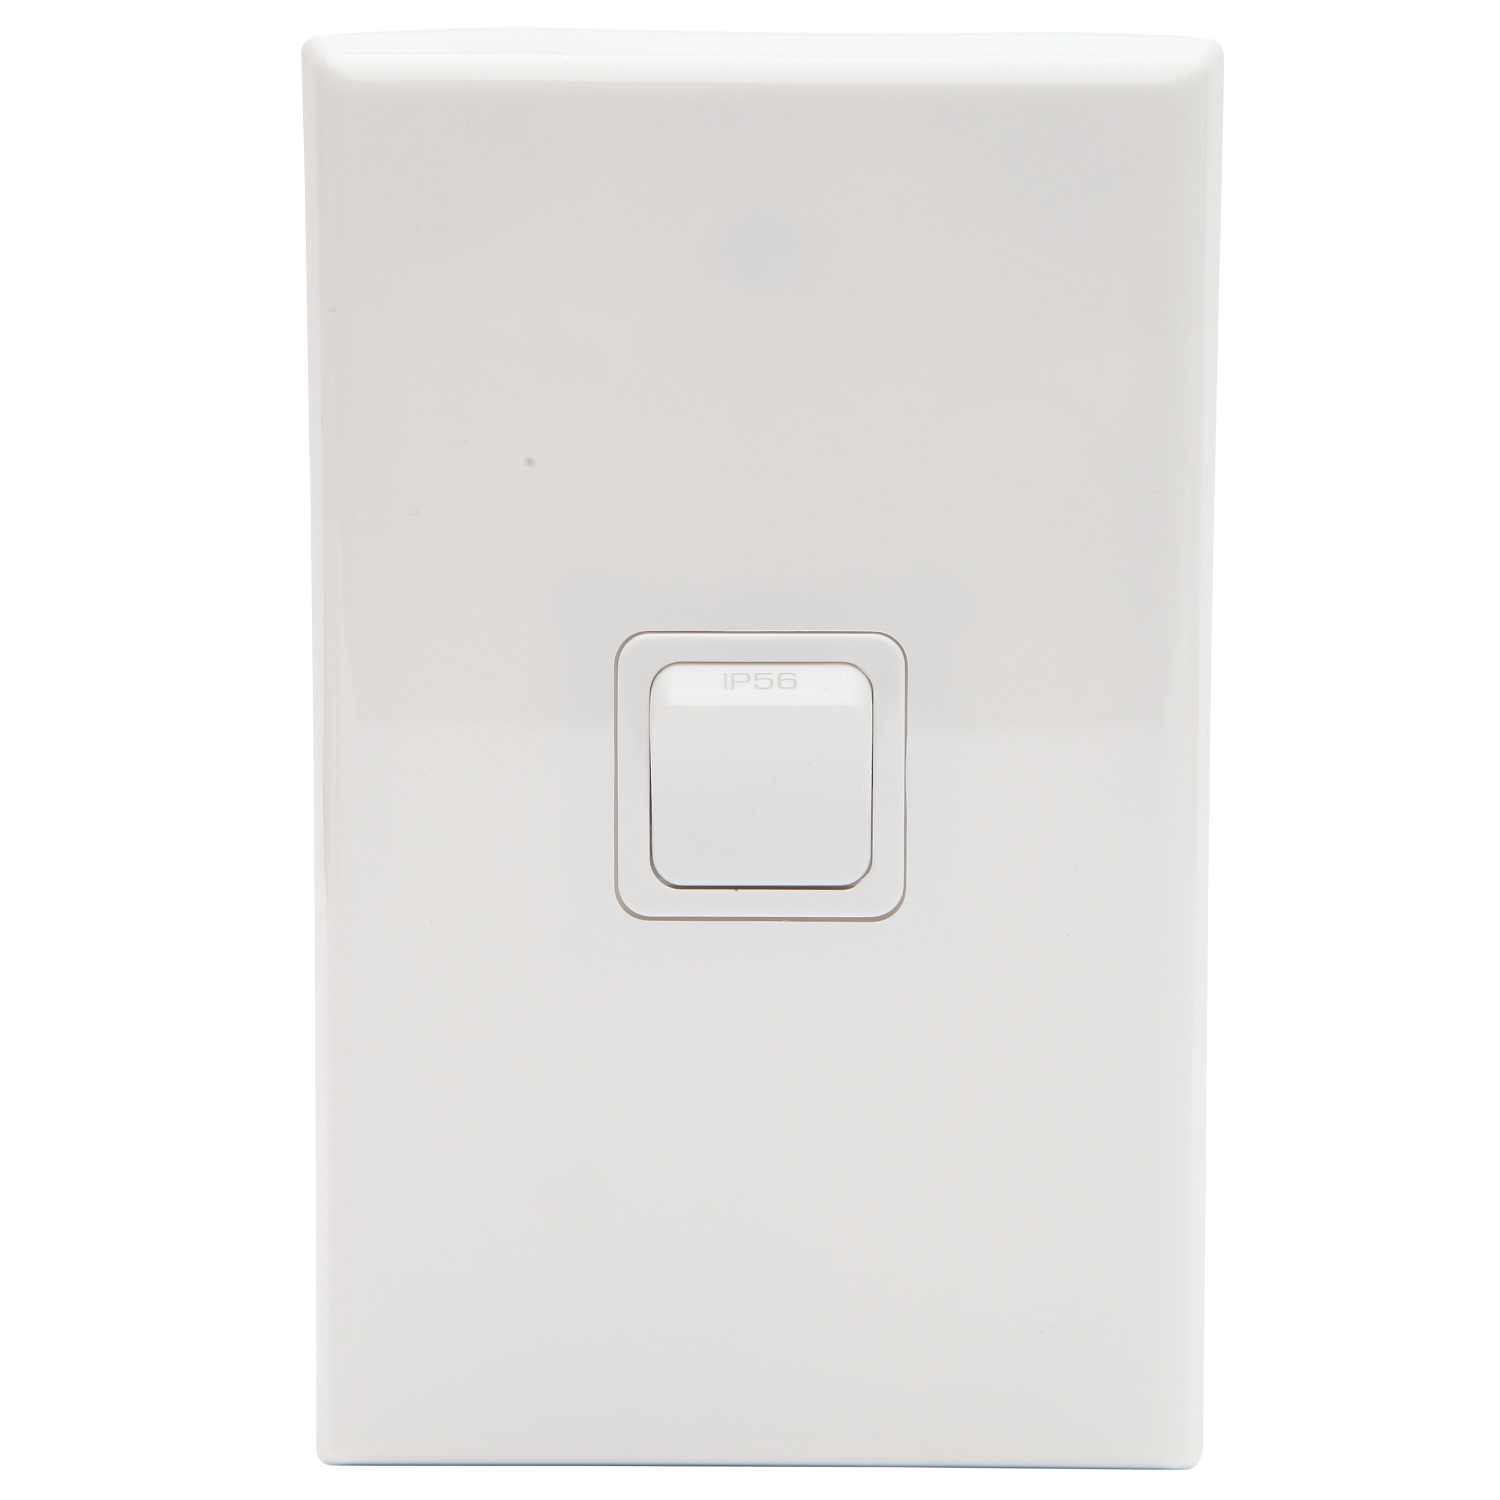 PDL Switch 600 Series - Assembled - Vertical - 1-gang - Single-pole - 250 V - 16 A / 16 AX - White